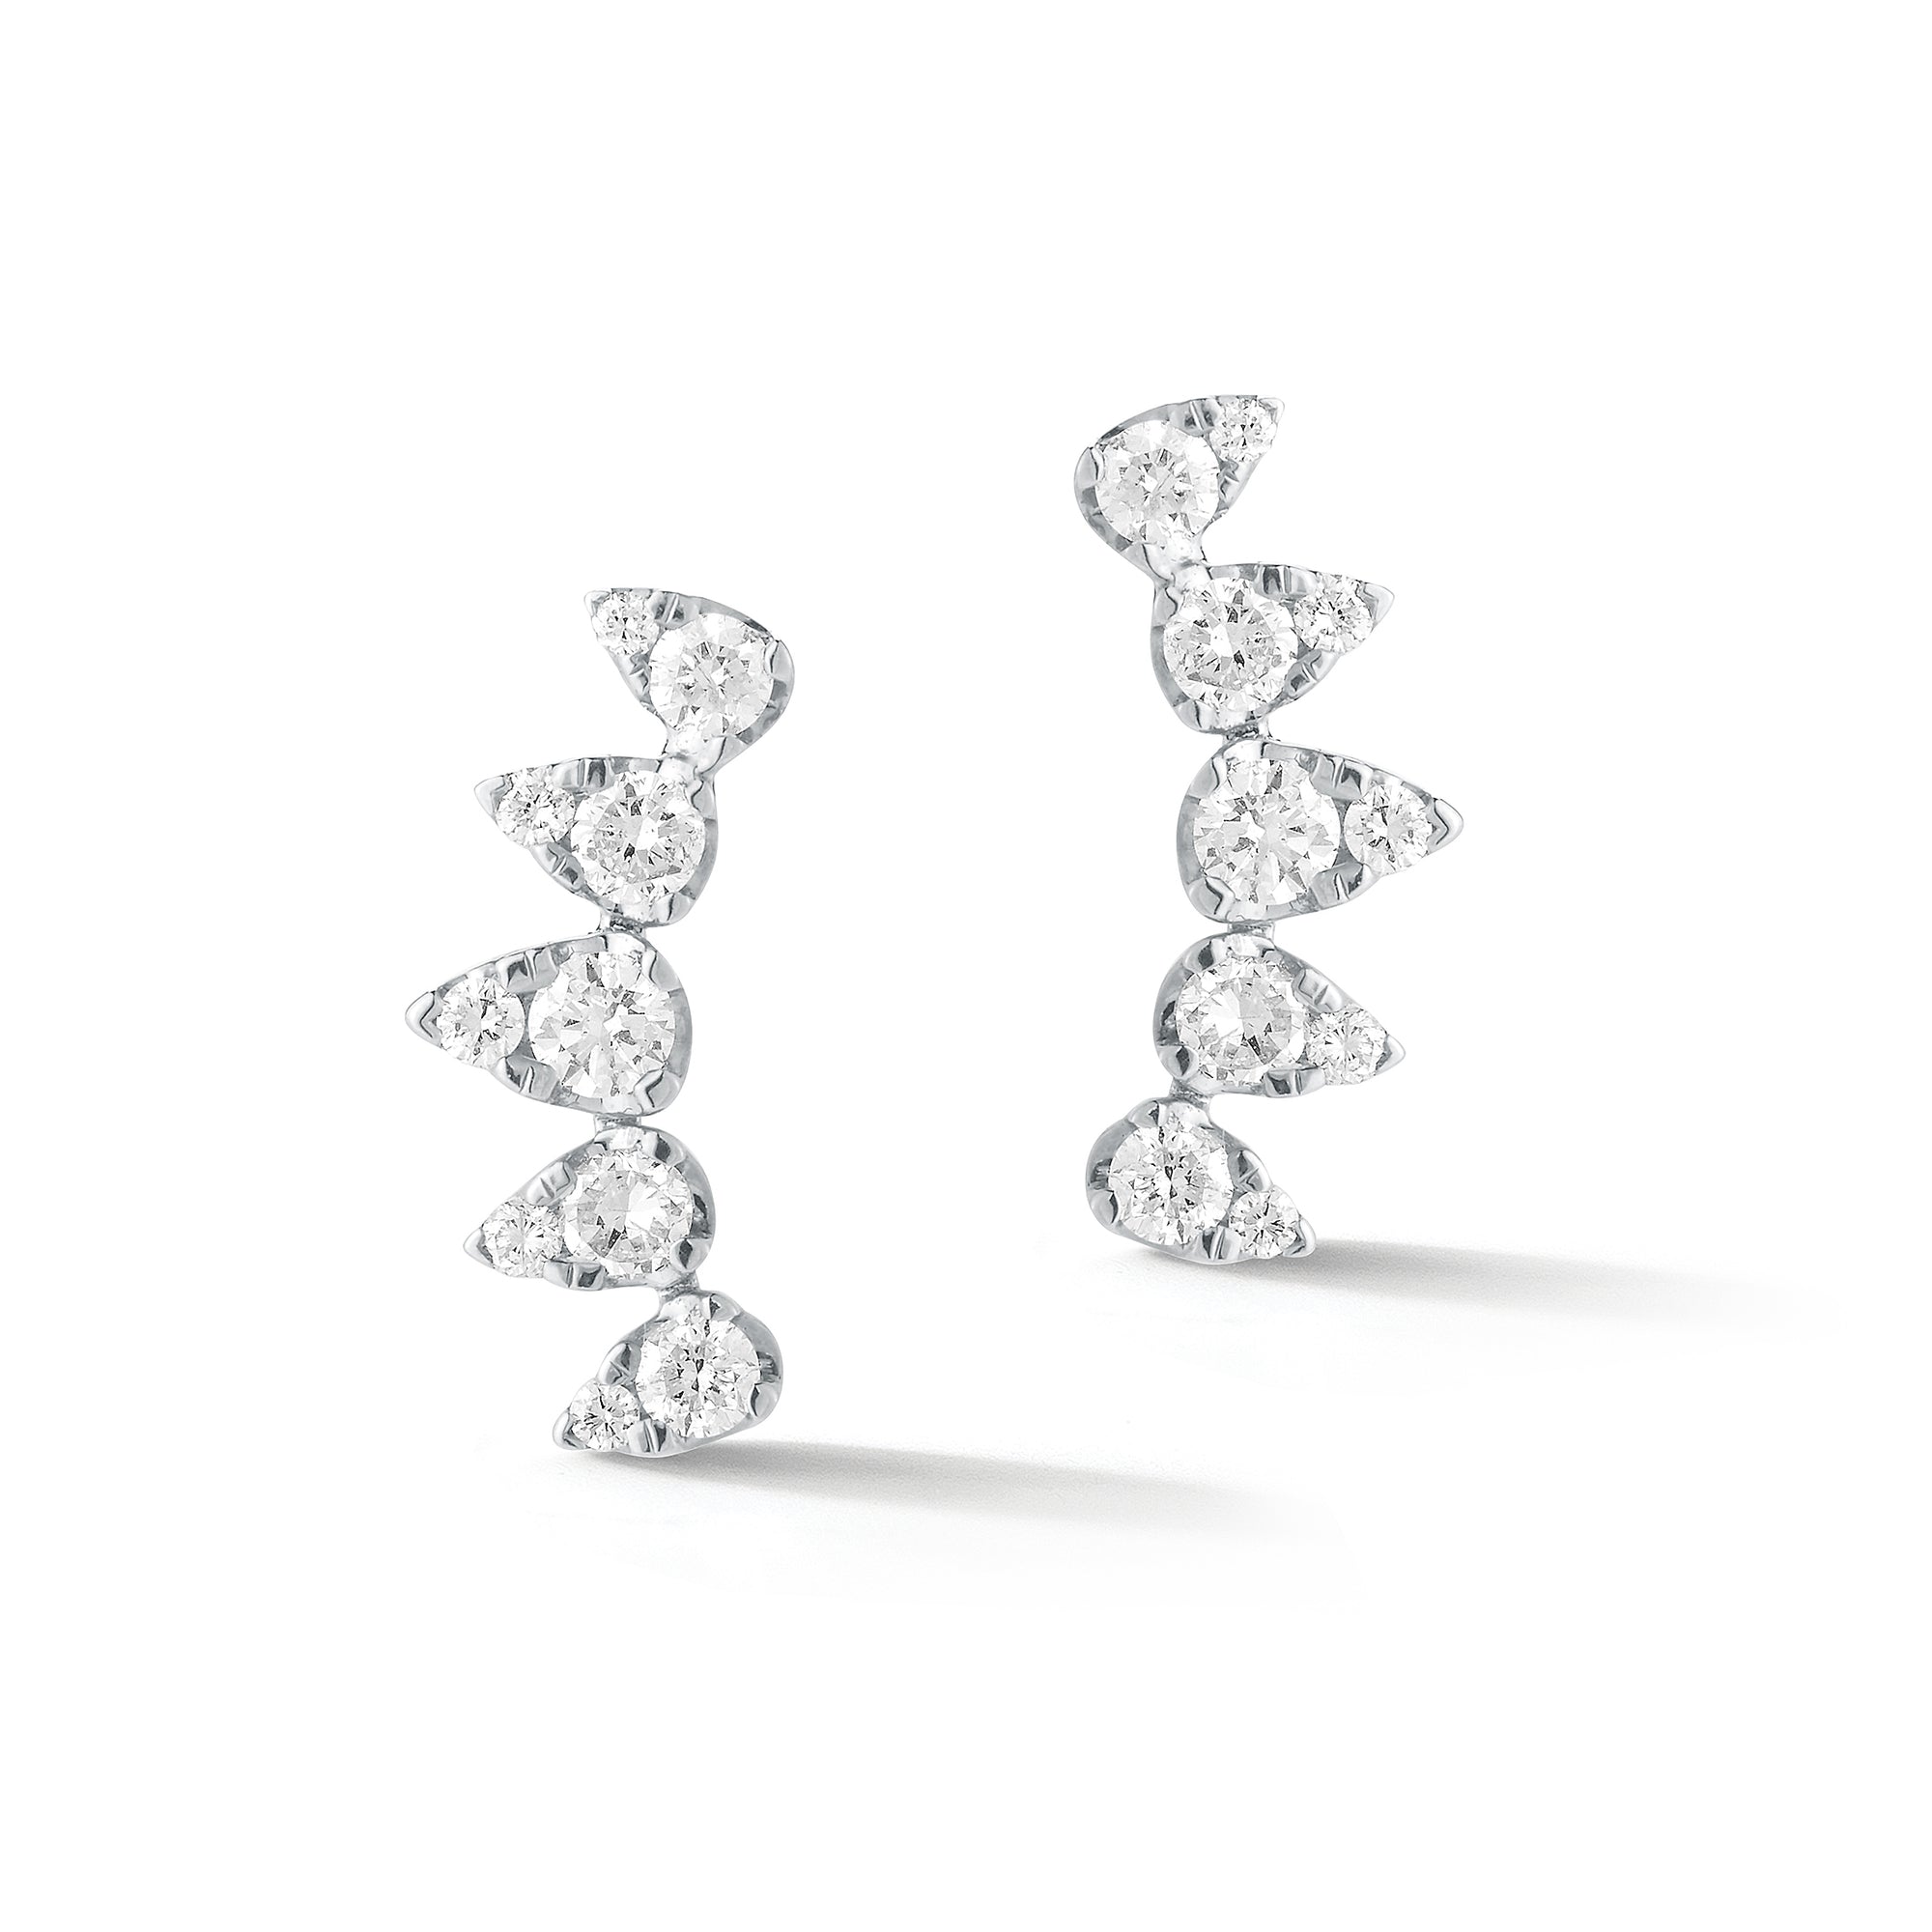 Diamond spike crawler earrings-14k gold weighing 1.46 grams  -20 round shared prong-set brilliant diamonds weighing 0.43 carats